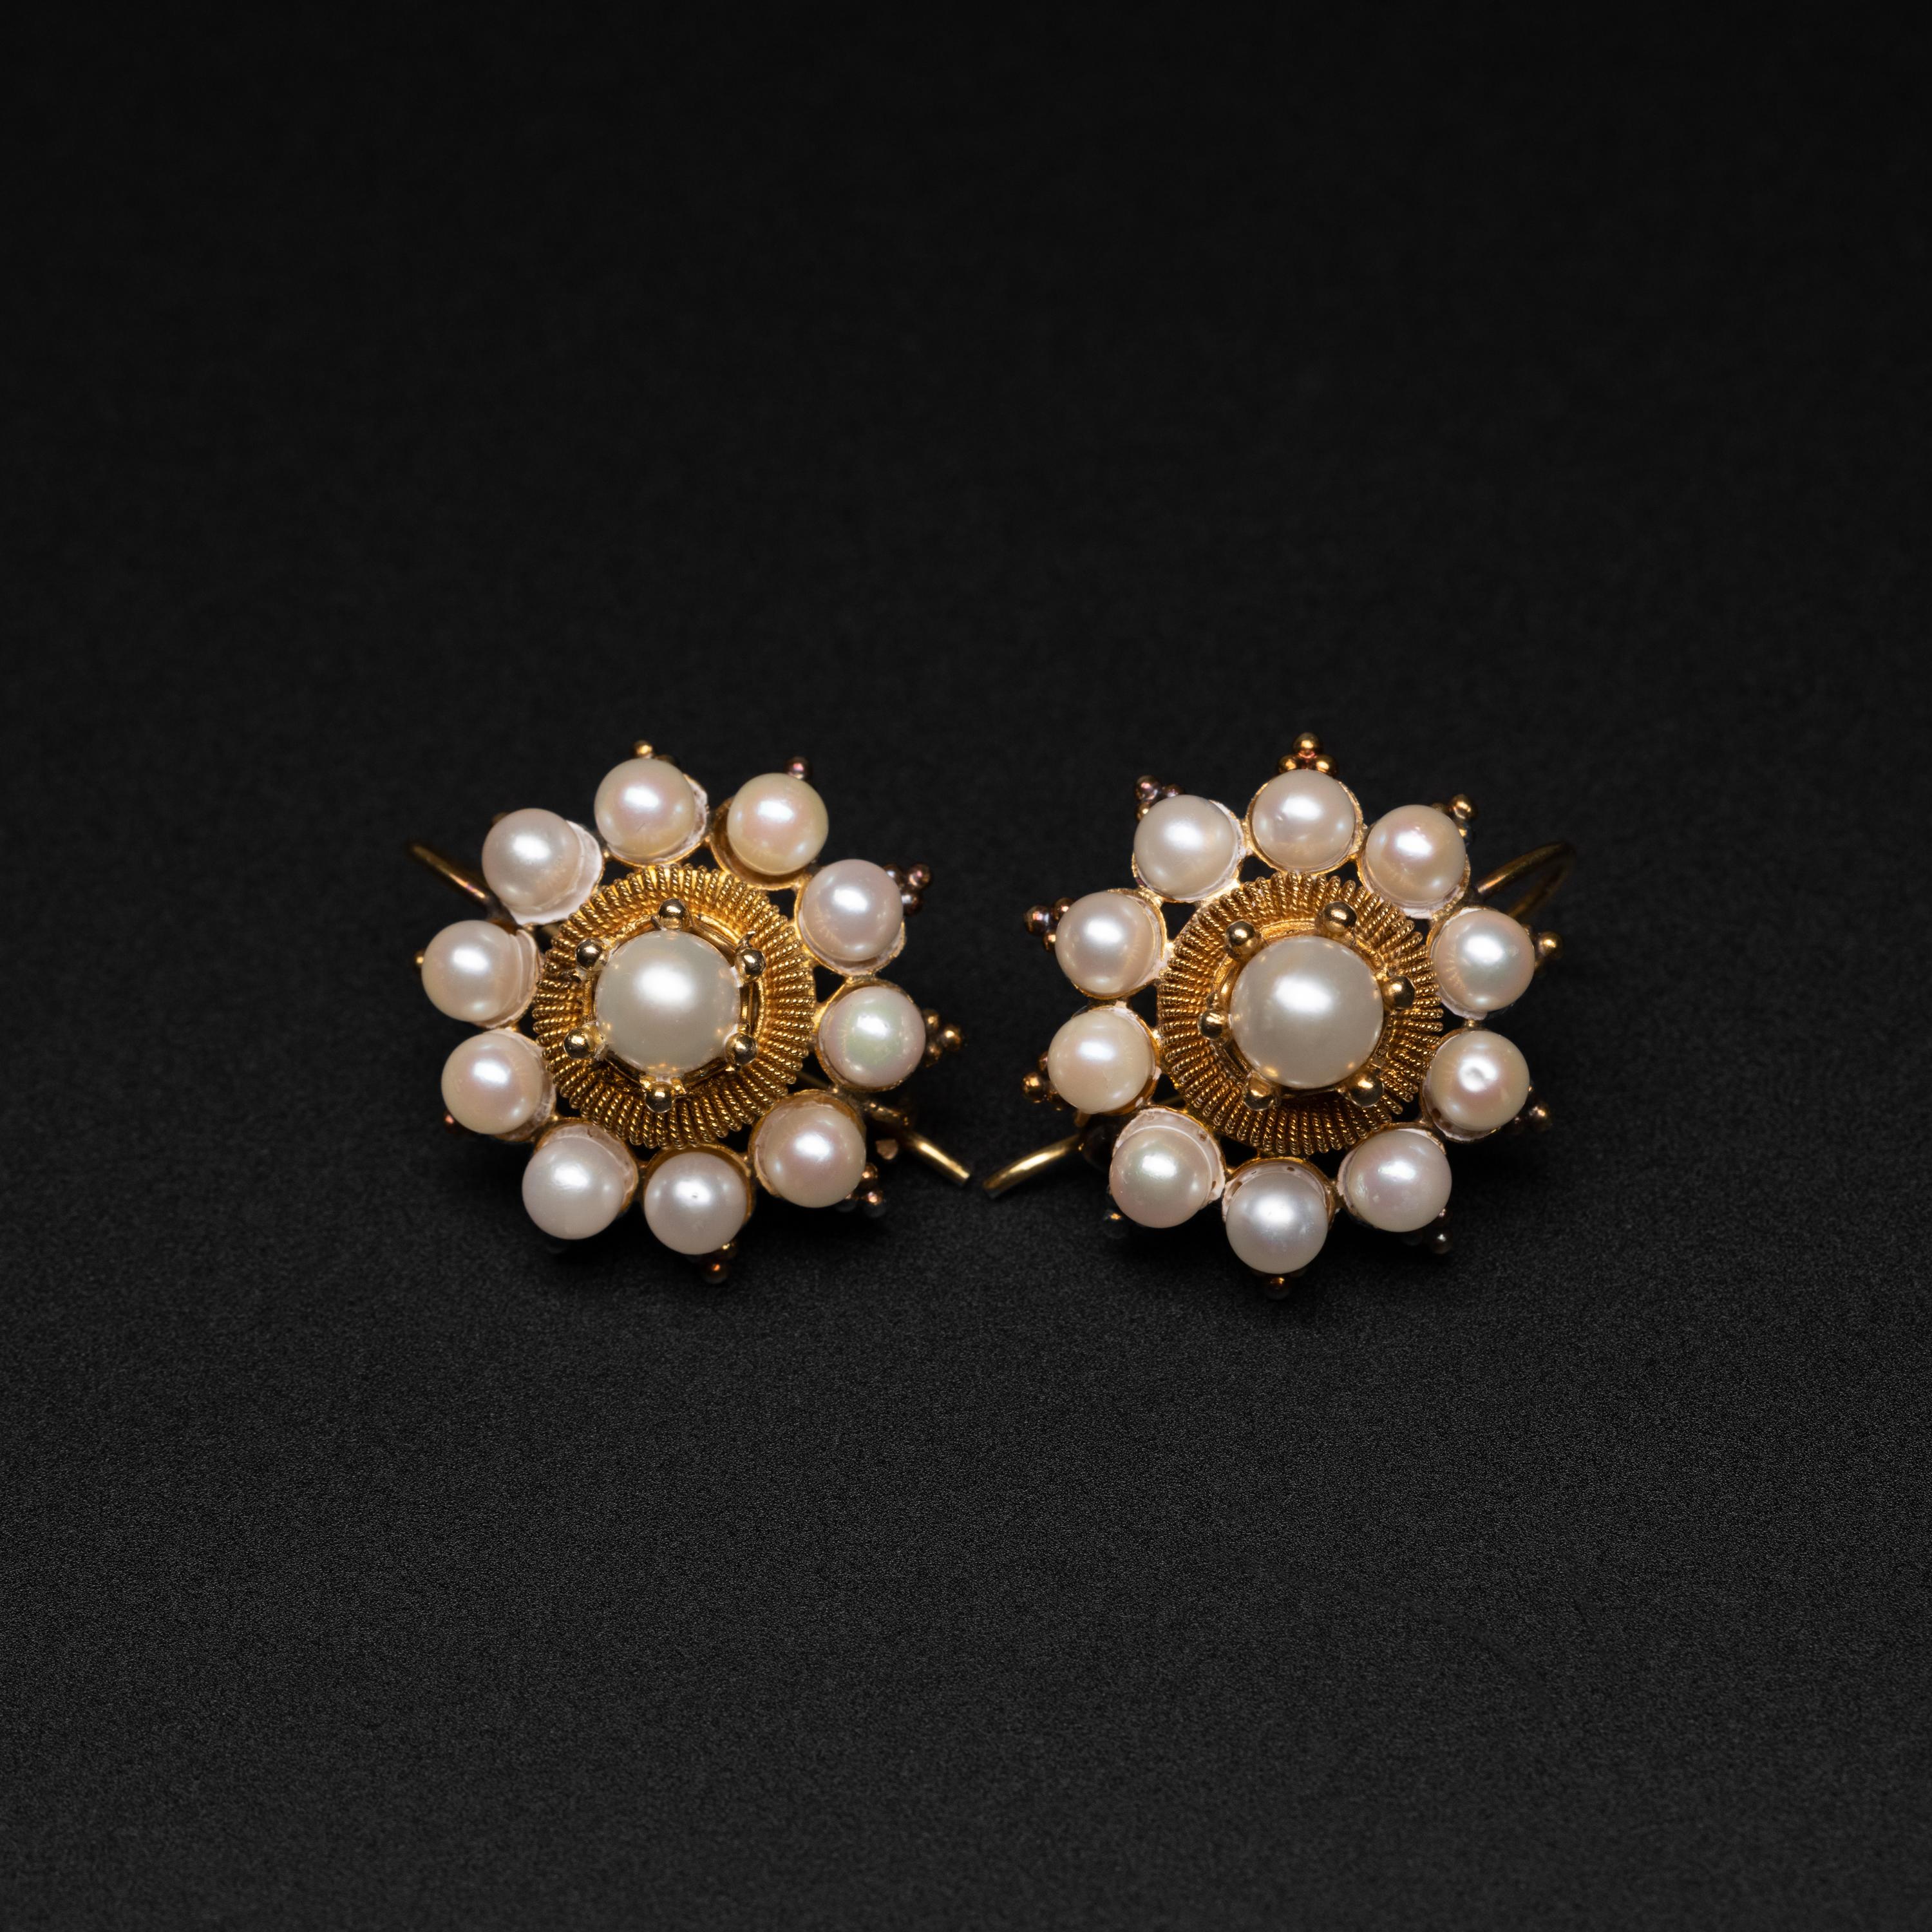 Exquisitely hand-crafted, this pair of Midcentury (circa 1950s) earrings each feature ten fine 4mm cultured Akoya pearls encircling a coronet-set 5.9mm Akoya pearl. Surrounding each of the focal-point pearls is a circular base of finely twisted gold